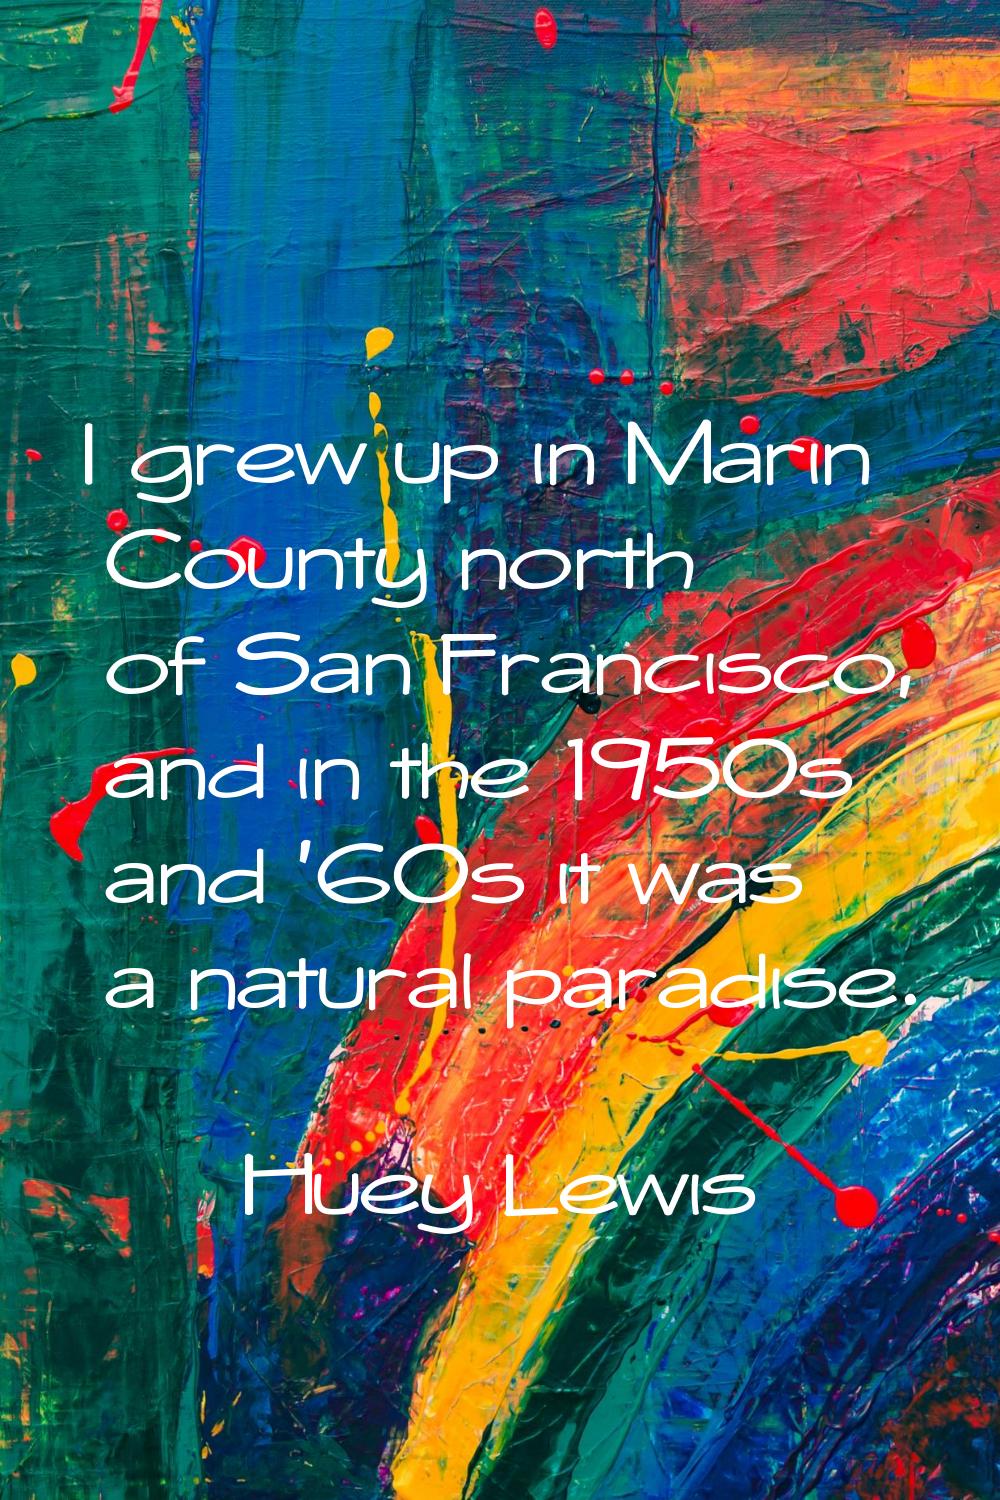 I grew up in Marin County north of San Francisco, and in the 1950s and '60s it was a natural paradi